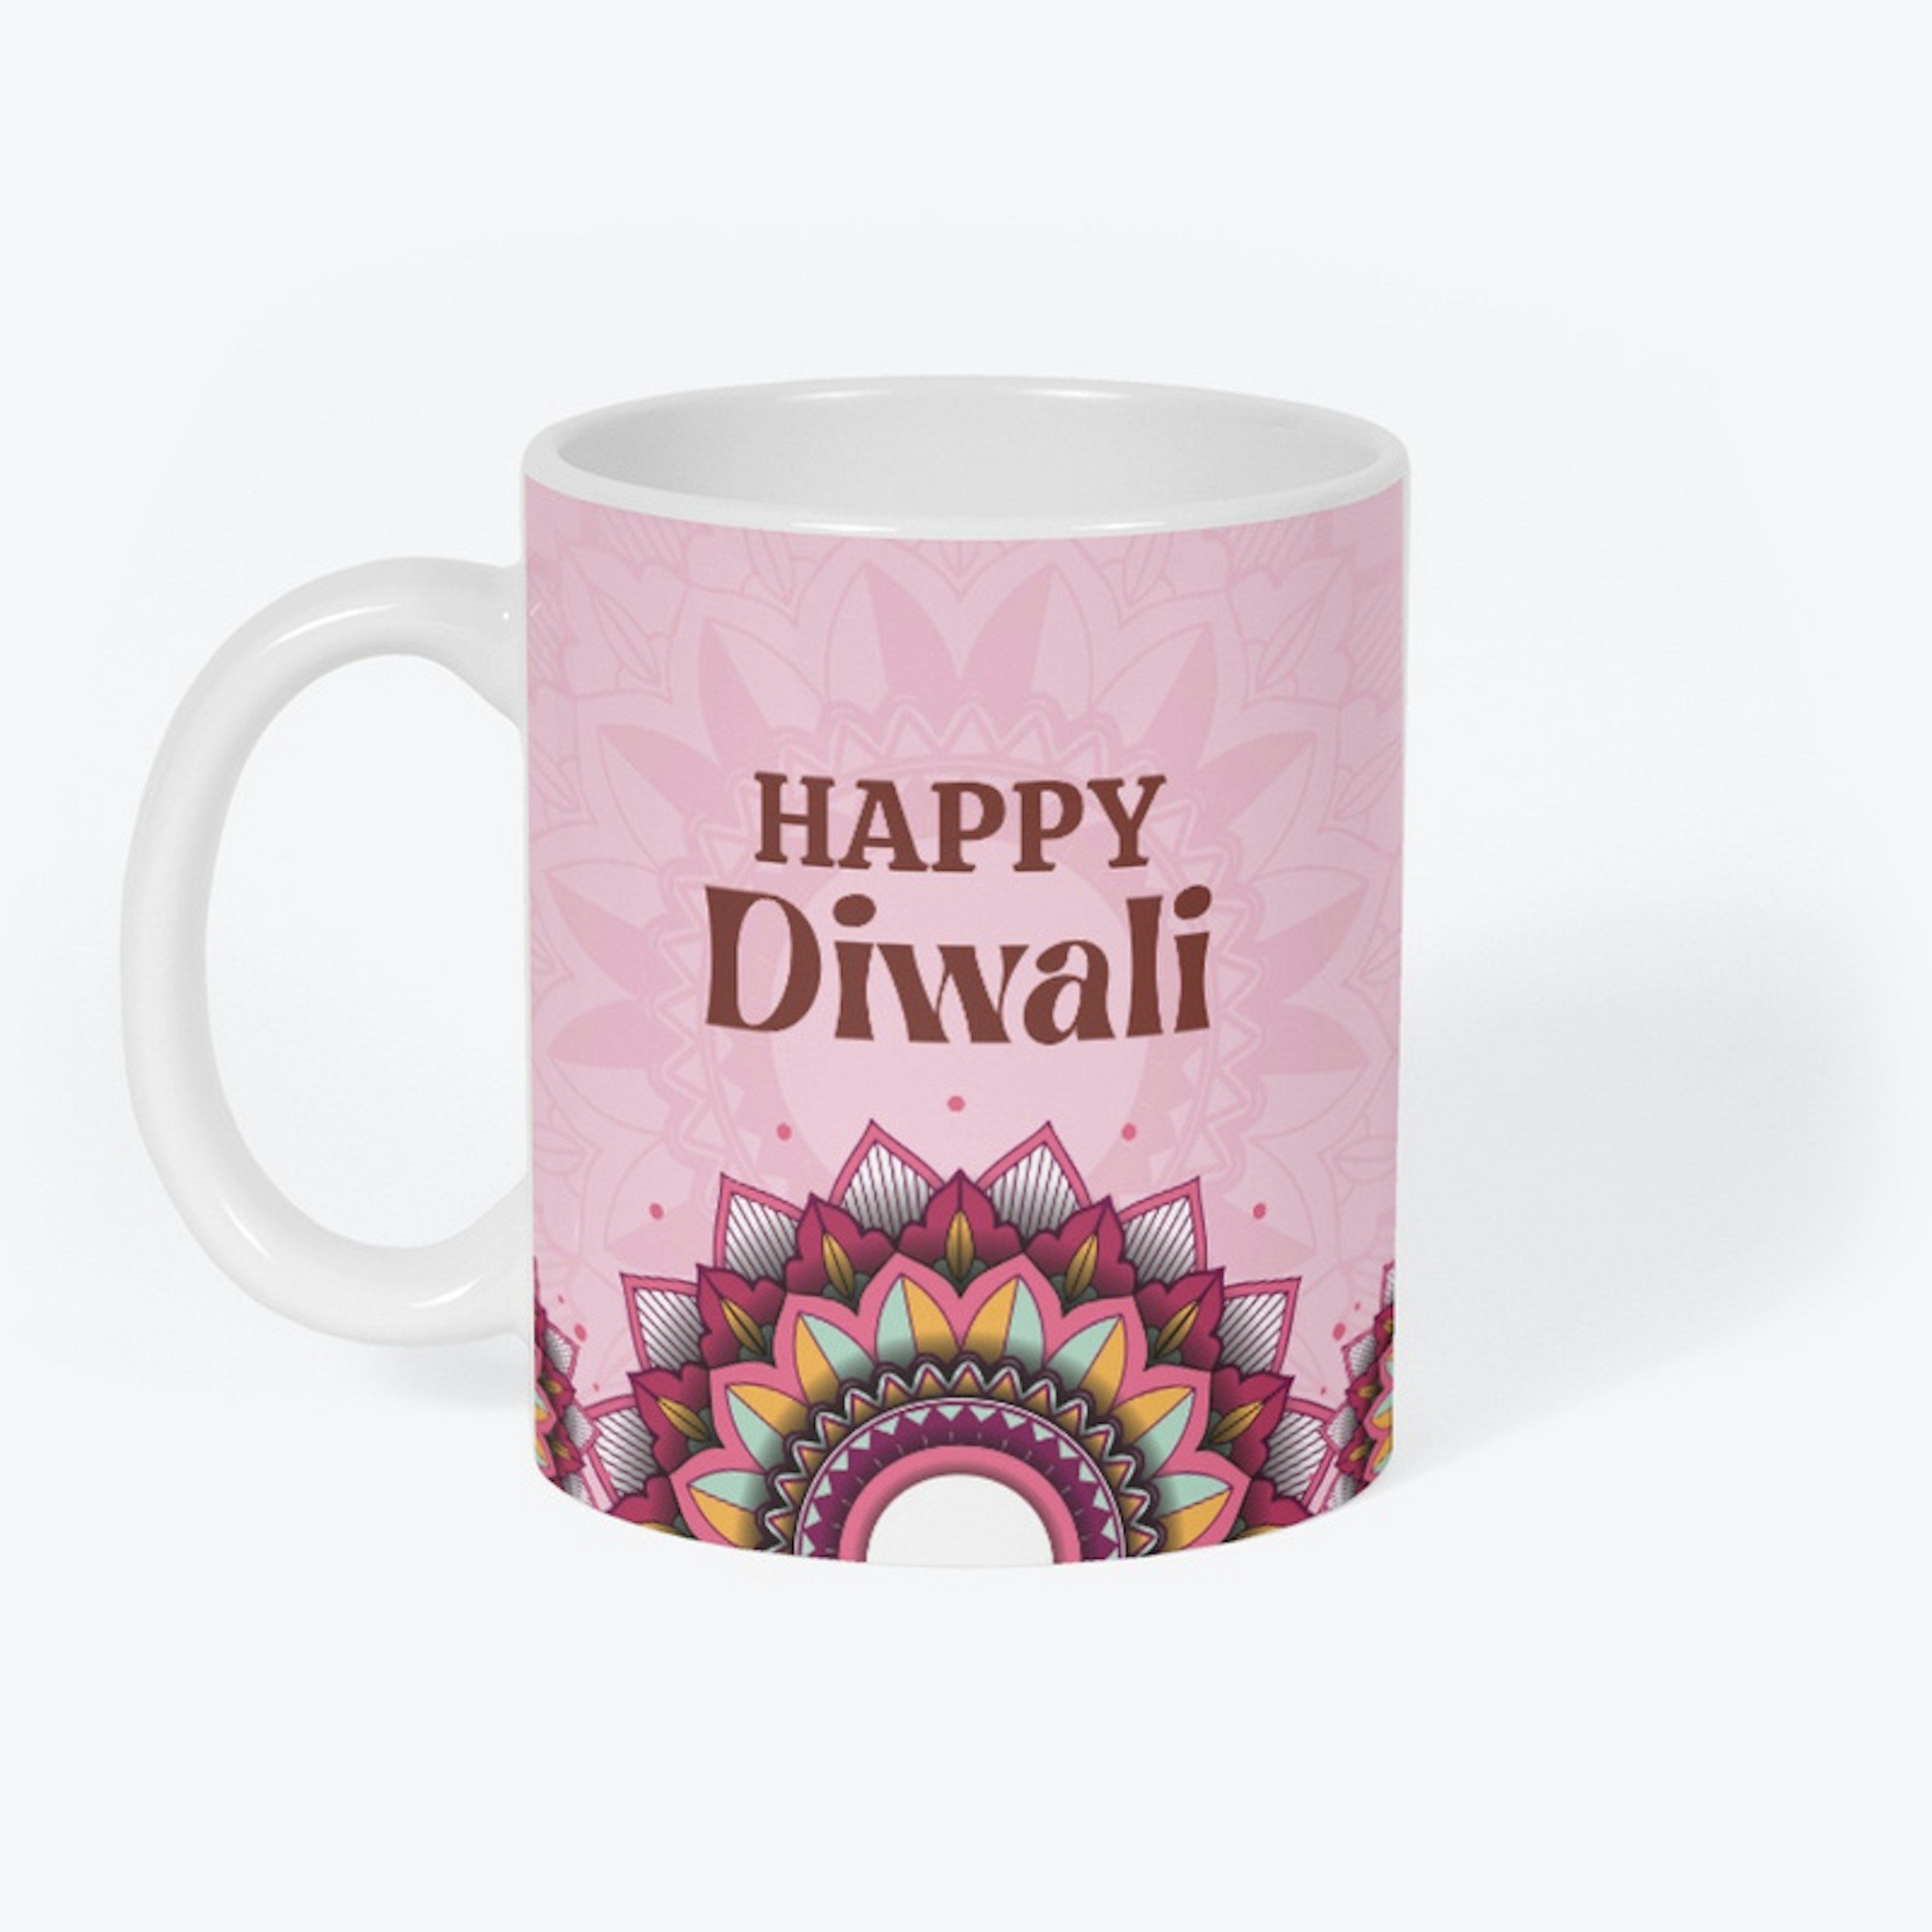 Happy Diwali Gift For Relatives & Family